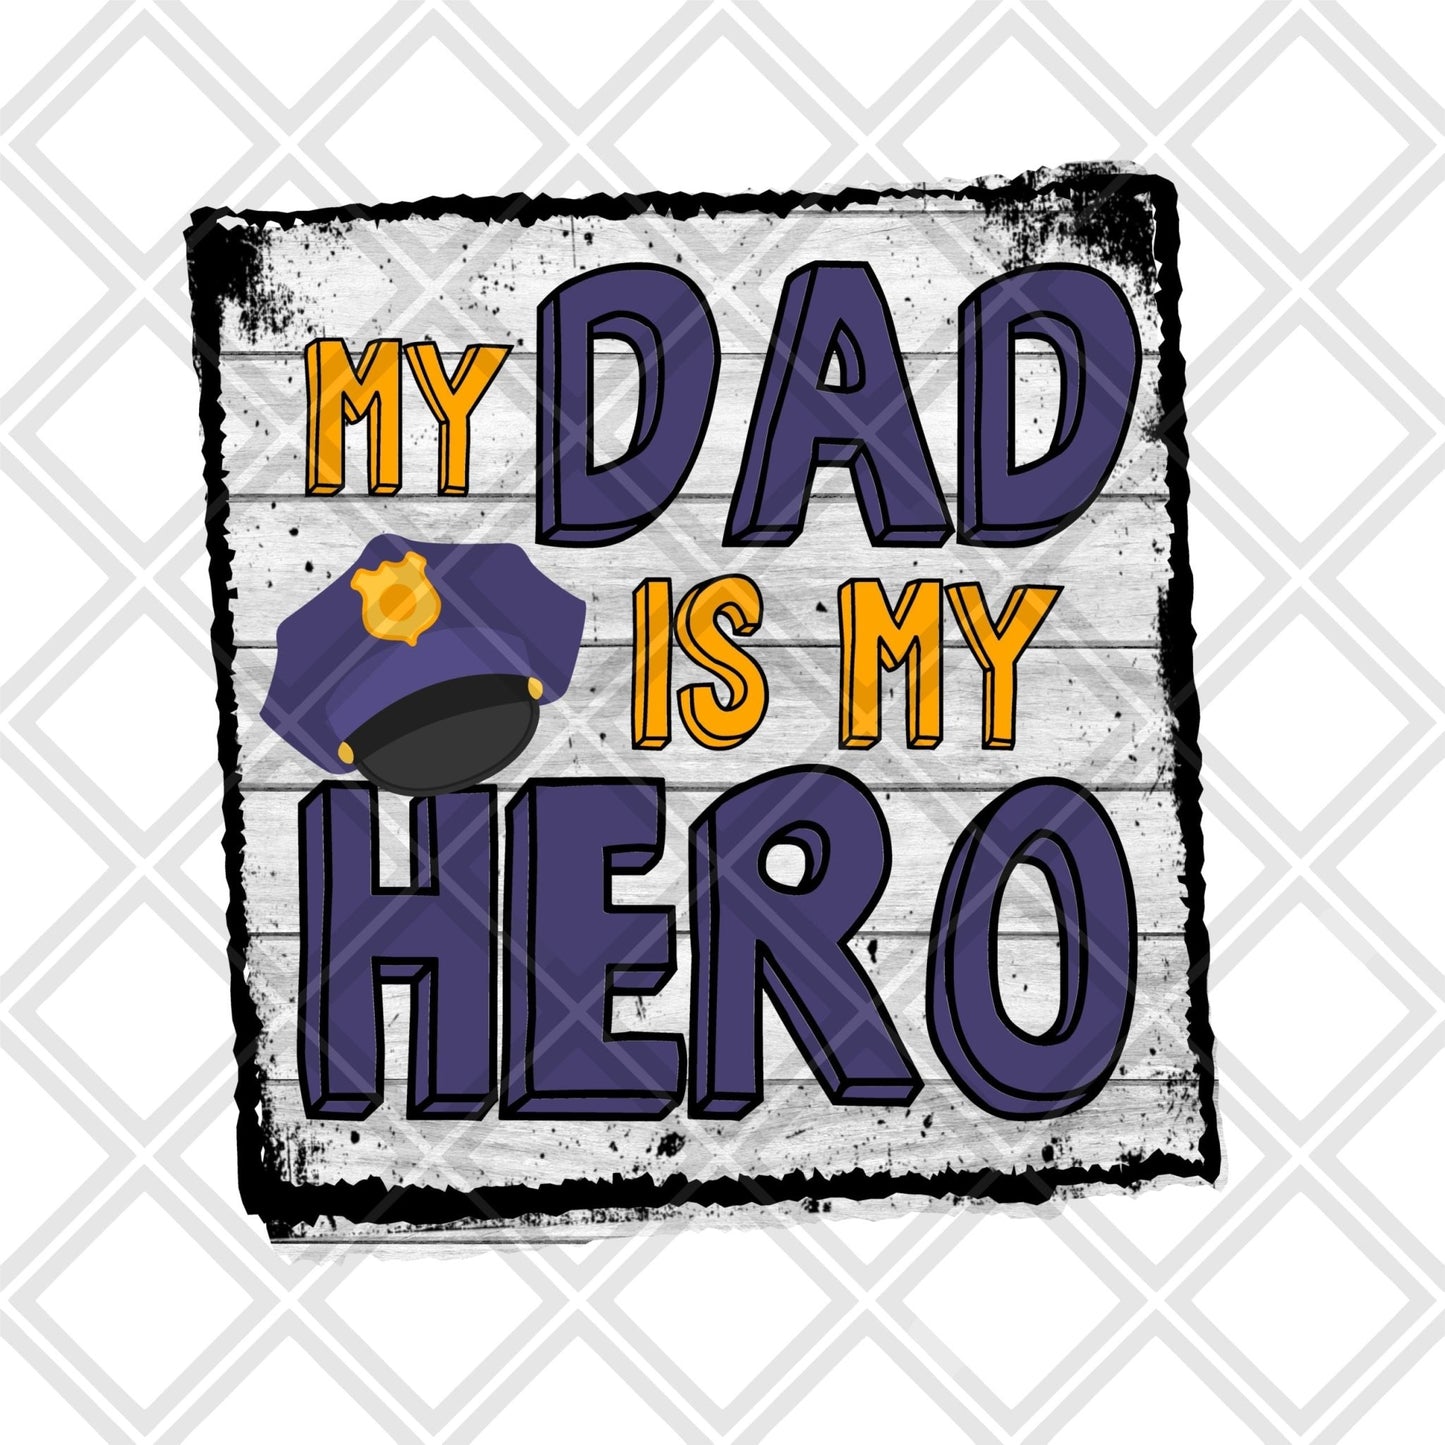 My dad is my hero DTF TRANSFERPRINT TO ORDER - Do it yourself Transfers